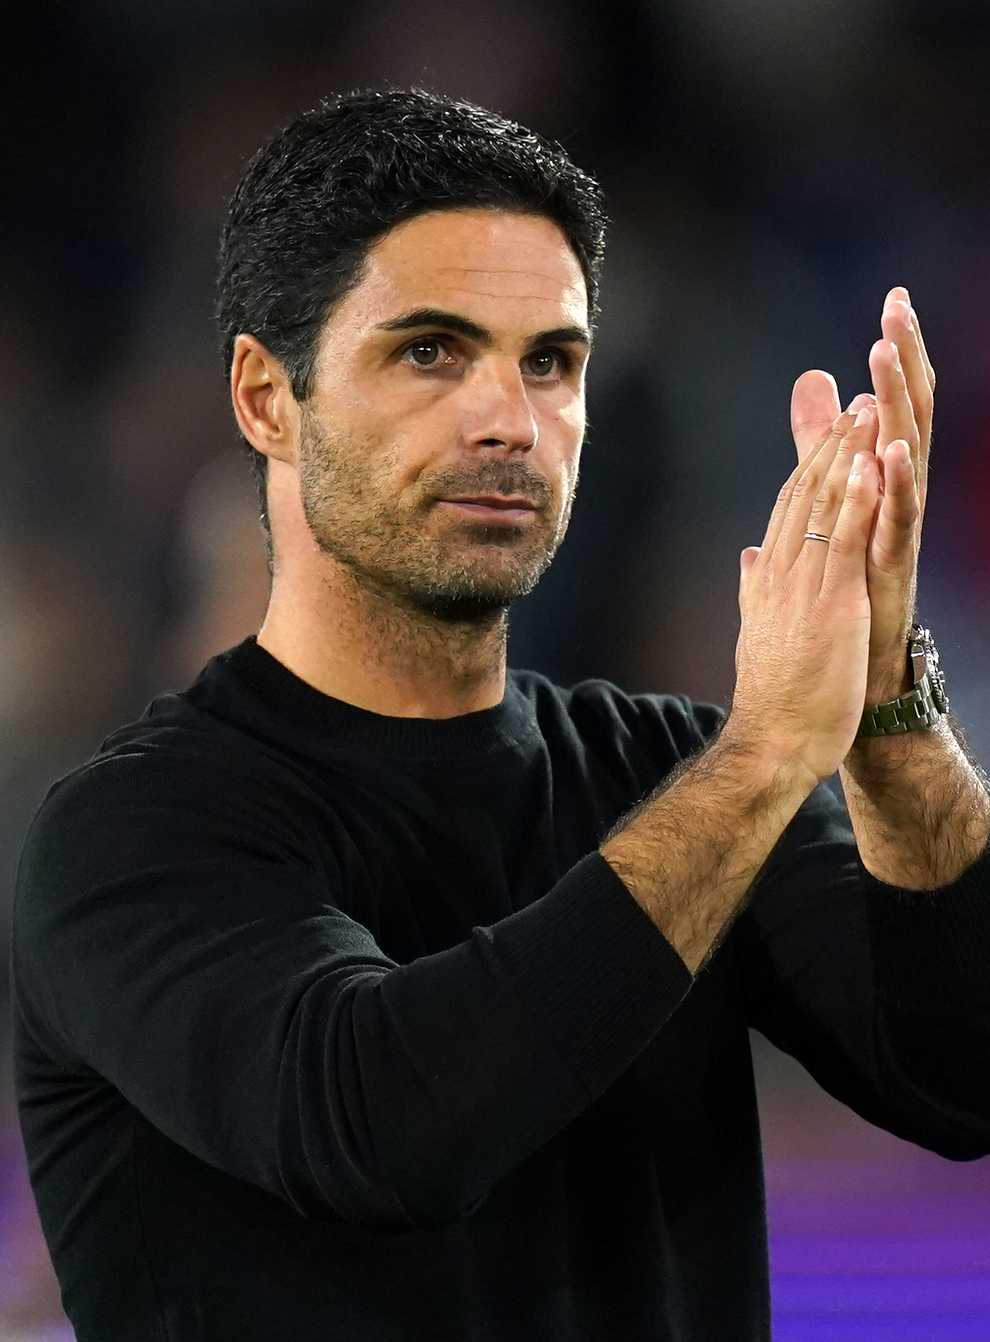 Mikel Arteta believes Arsenal have “grown up” and “matured” (Adam Davy/PA)